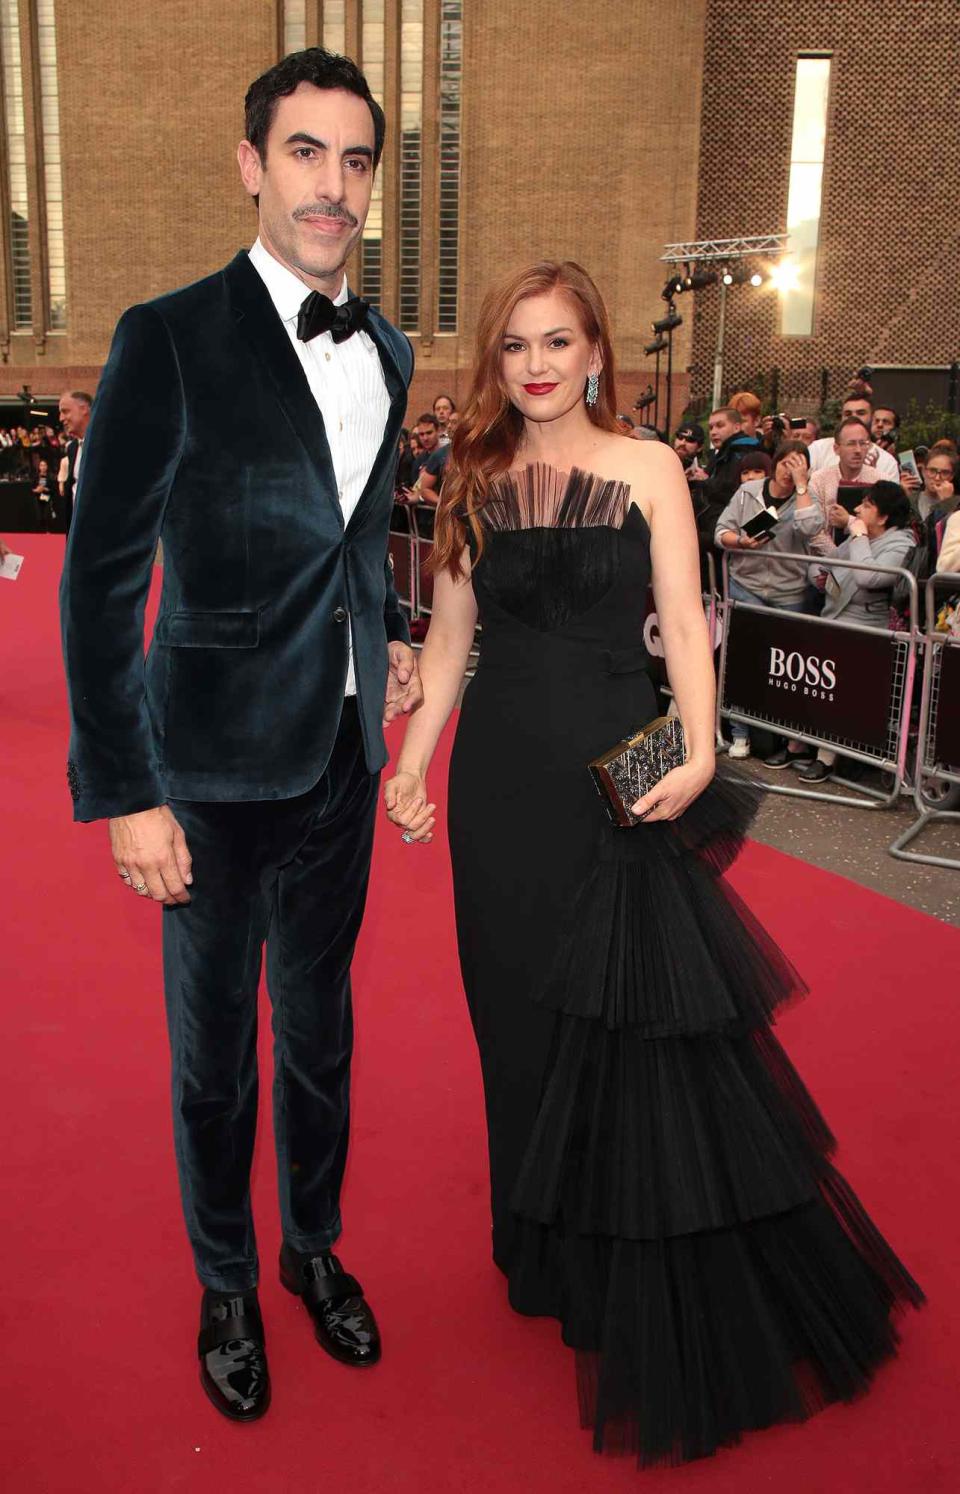 Sacha Baron Cohen and Isla Fisher seen attending GQ Men of the Year Awards at Tate Modern on September 5, 2018 in London, England